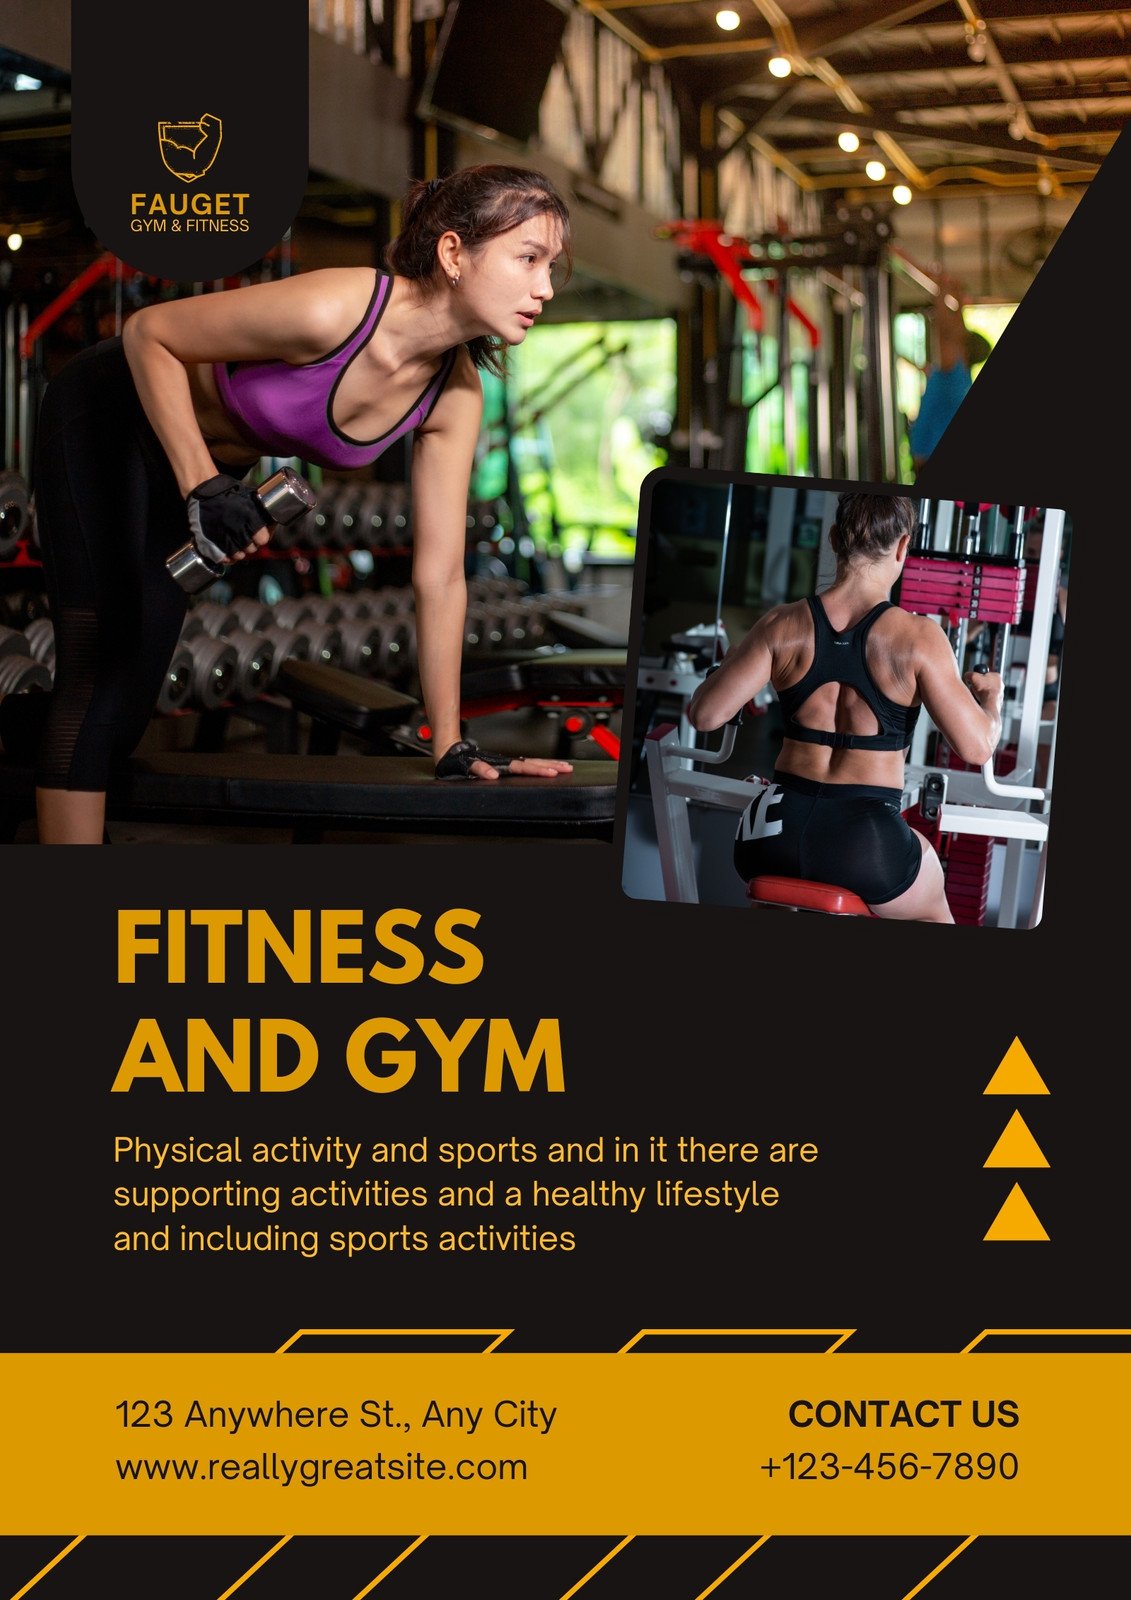 NewMe Fitness Introduces a Brand New Slider Disc Workout Poster on